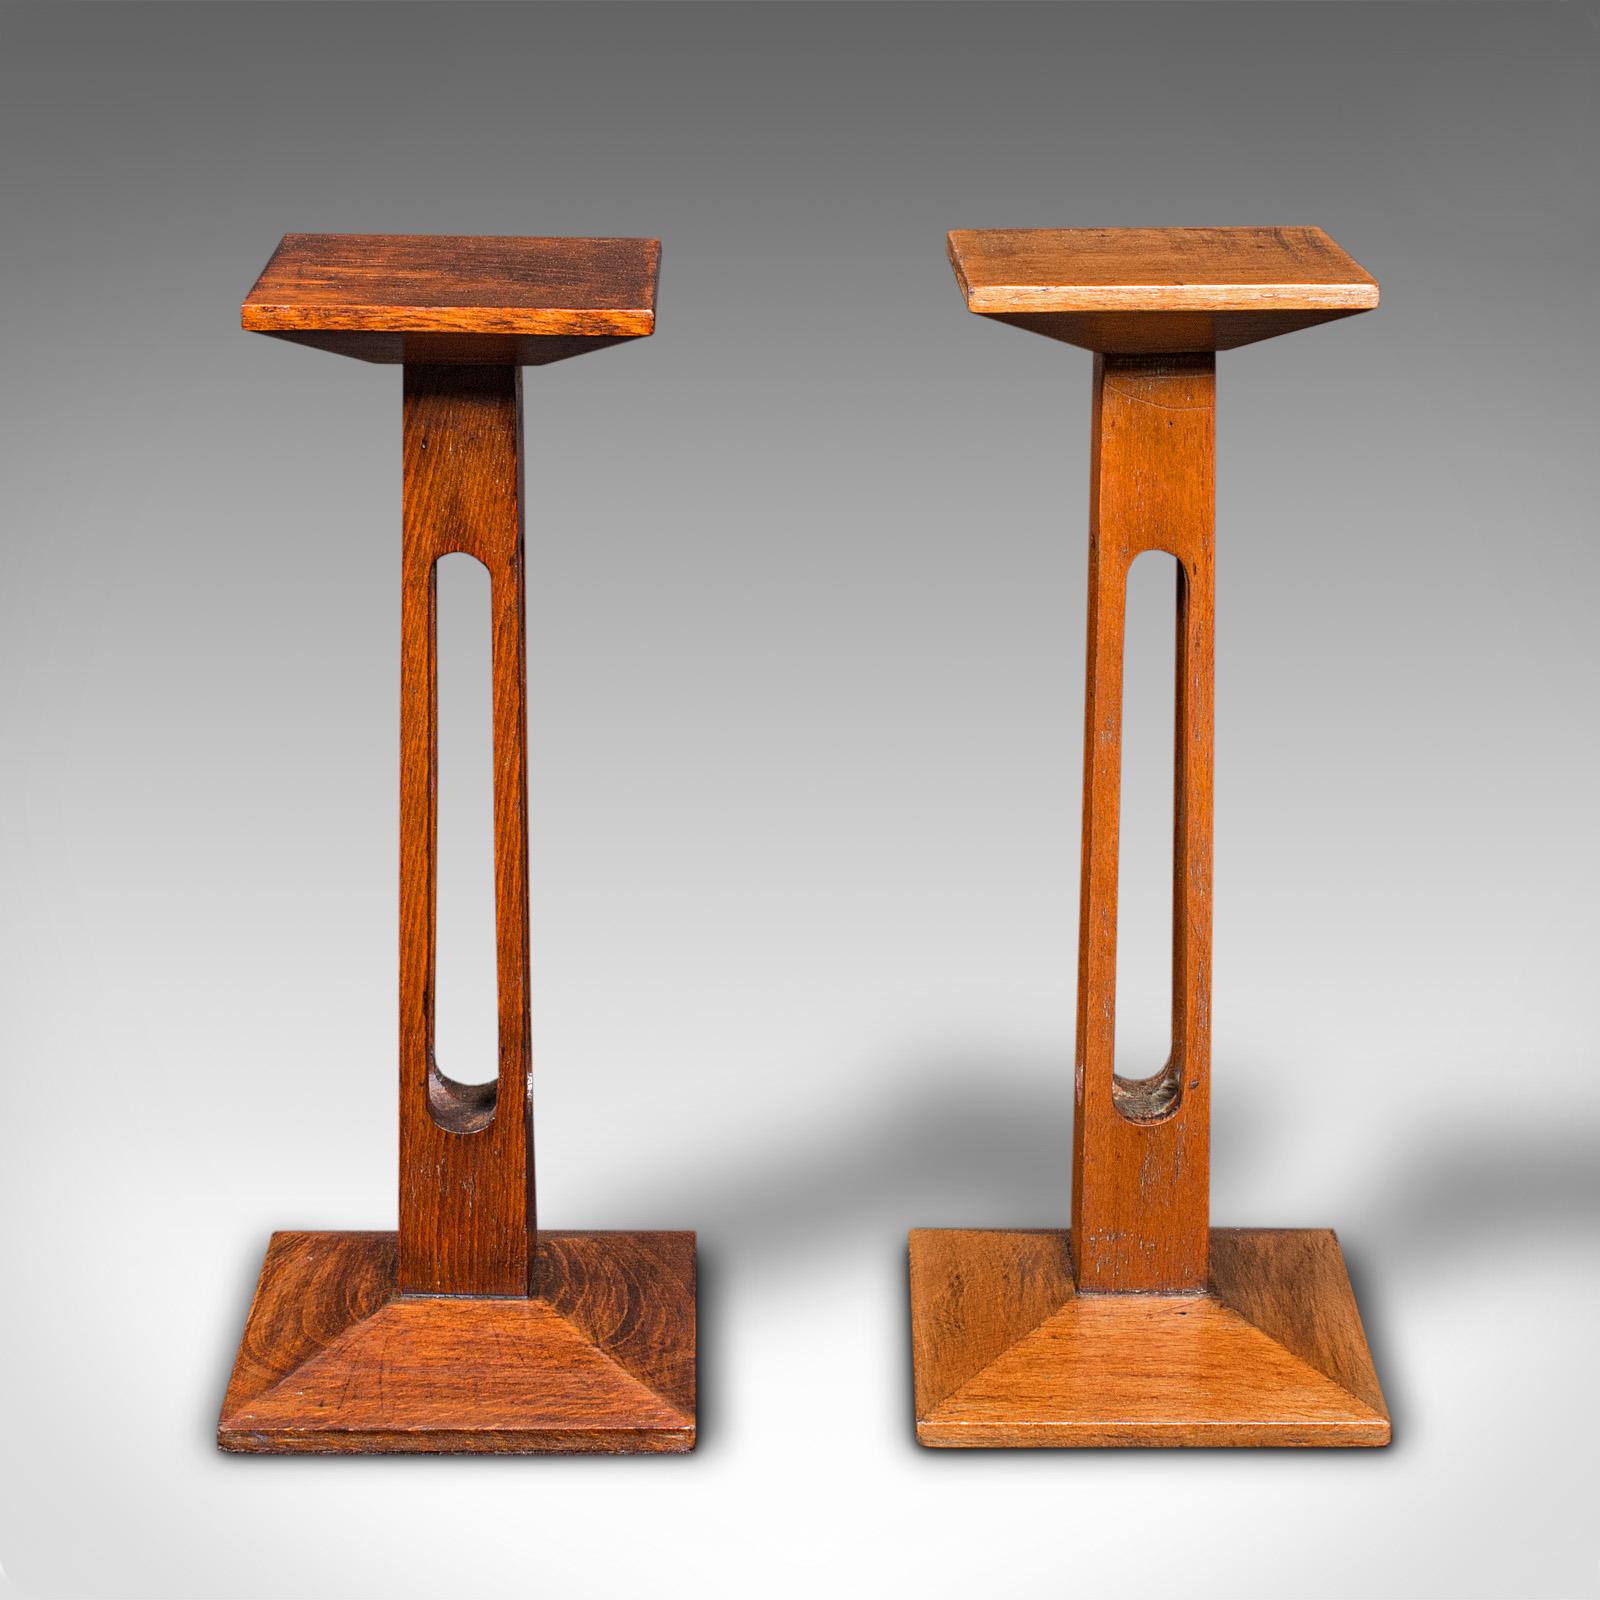 This is a pair of antique statue stands. An English, oak pedestal or torchere column, dating to the Edwardian period, circa 1910.

Perfect stands for presenting small busts or vases
Displaying a desirable aged patina and in good original